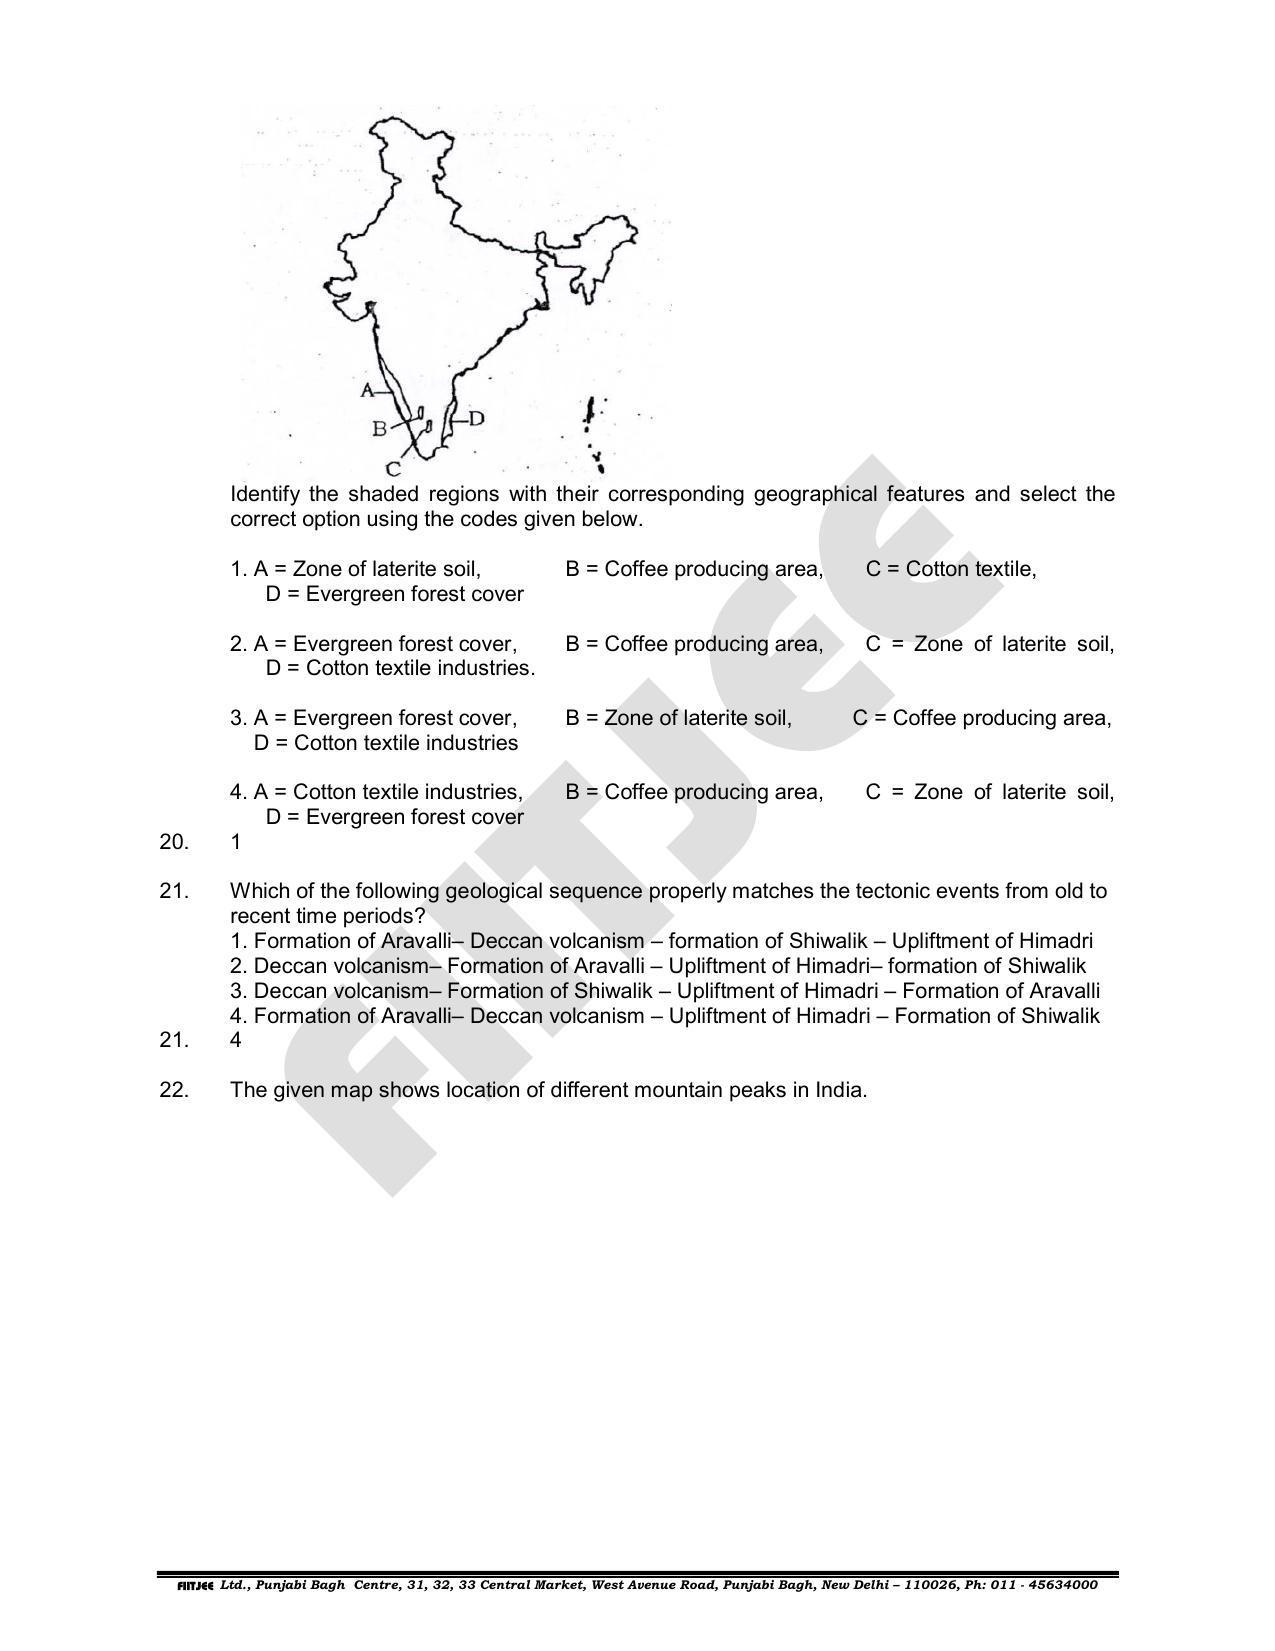 NTSE 2019 (Stage II) SAT Paper with Solution (June 16, 2019) - Page 6